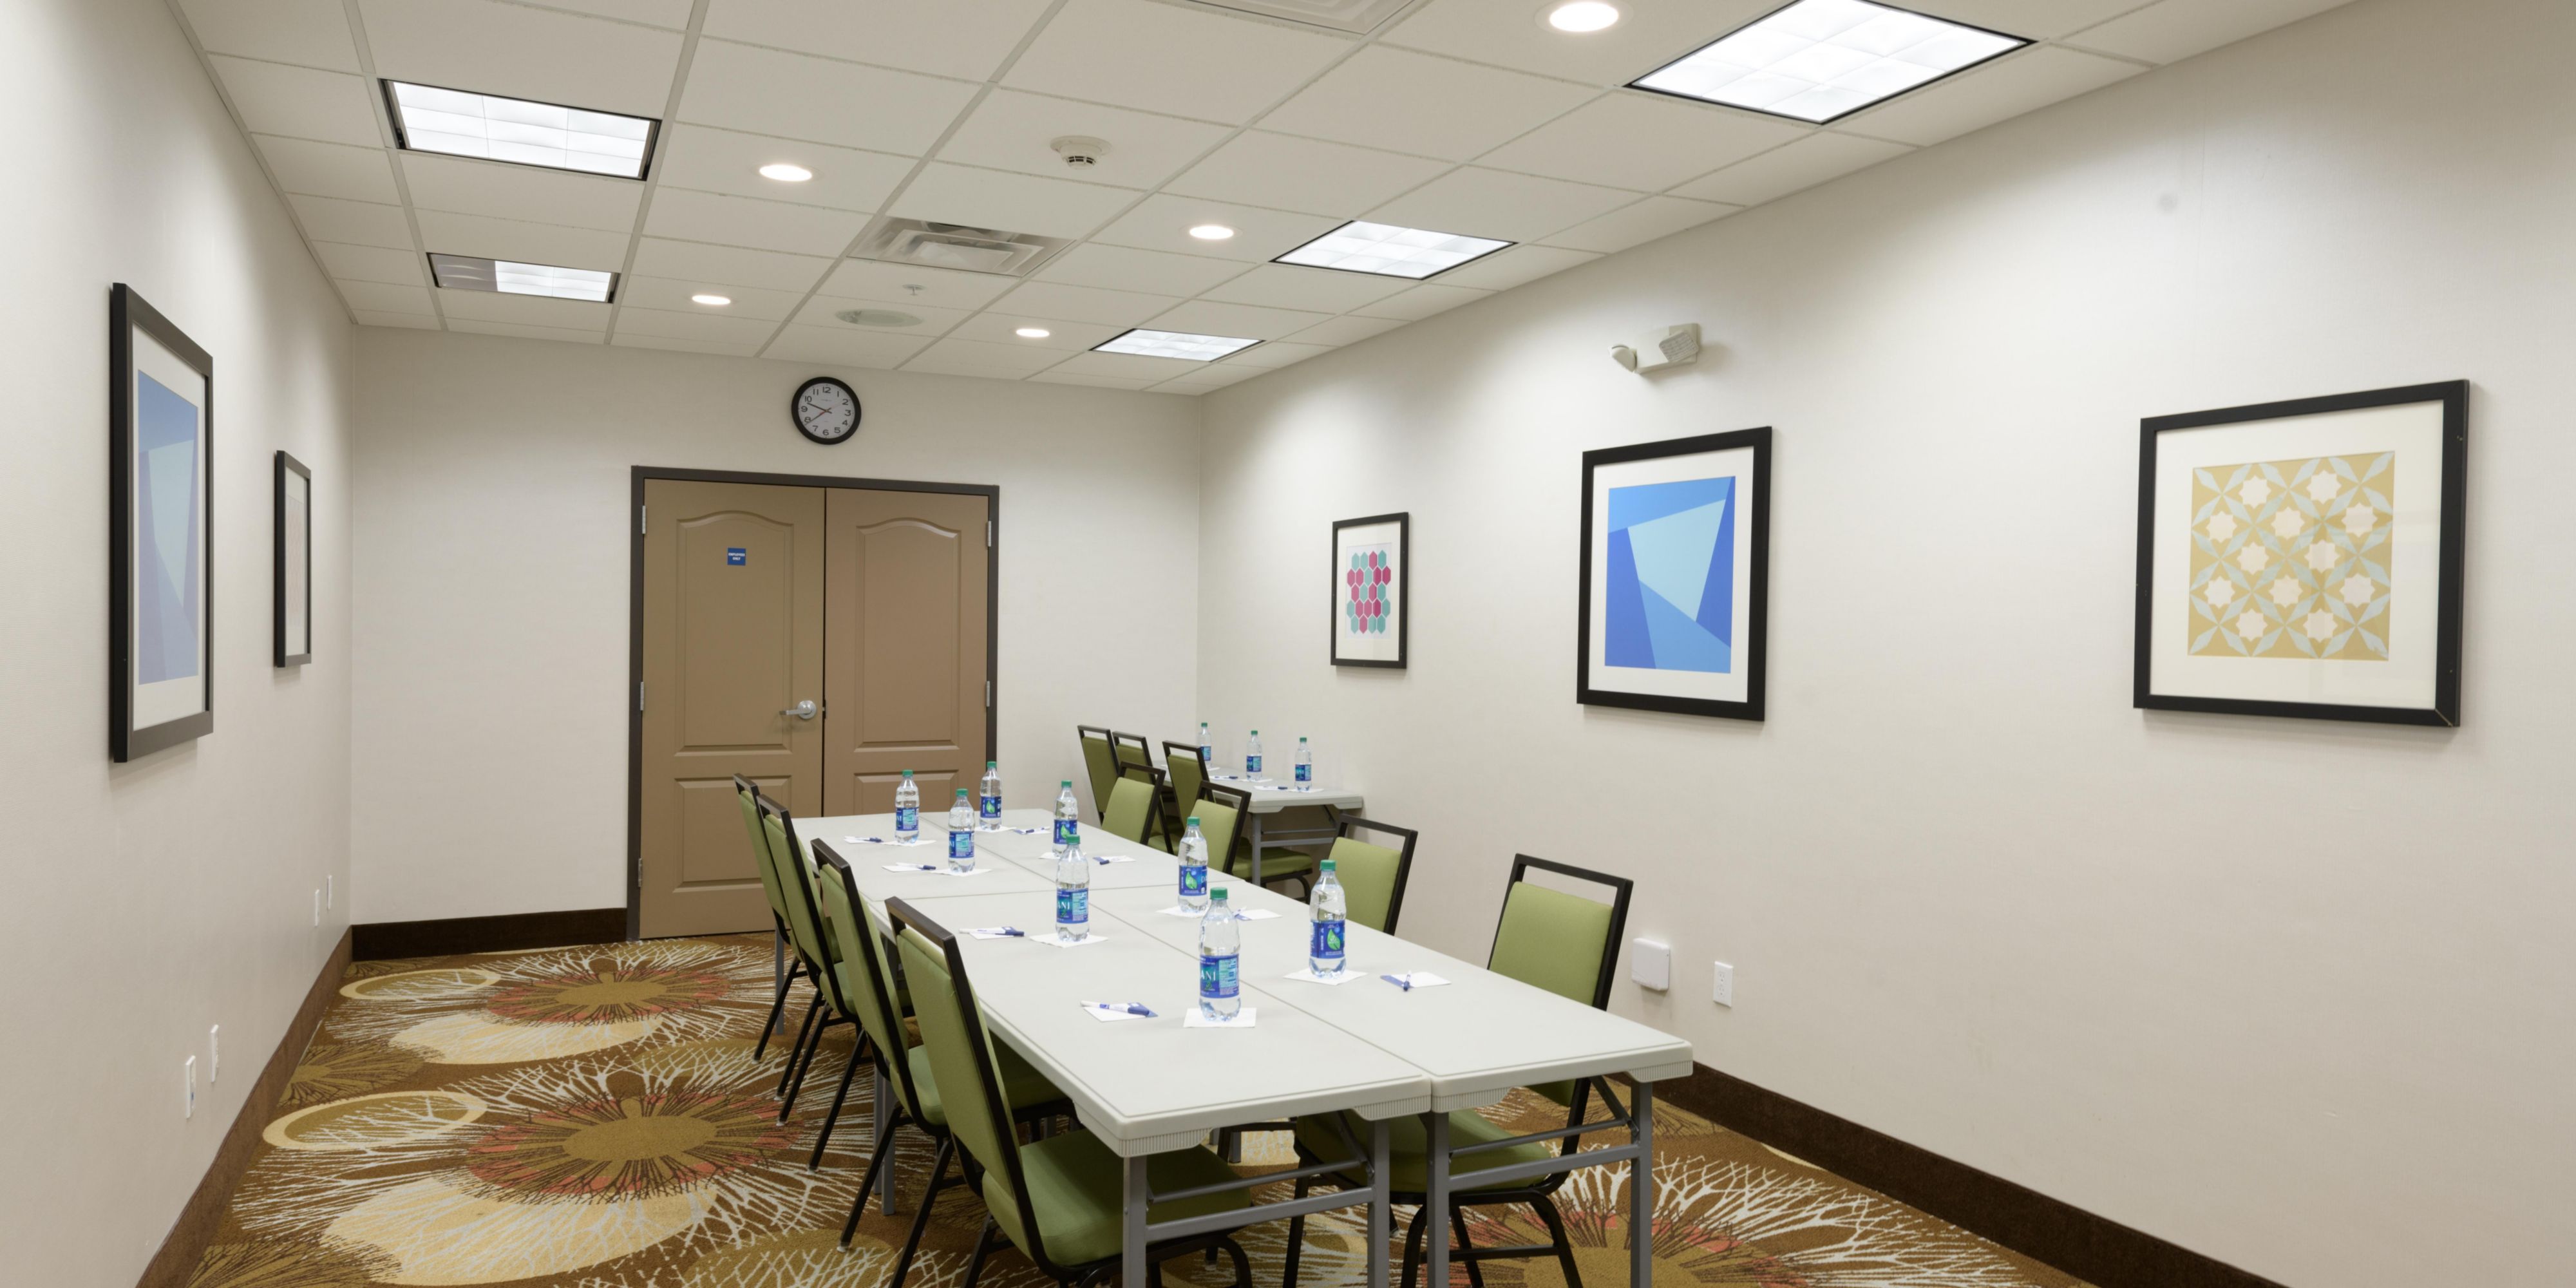 Book your next meeting in our conference room and we will bonus you 5,000 IHG reward points! 
The cost for room rental is $30 per hour. 
You are welcome to bring in your own food and beverage. 
We have audiovisual equipment available for additional rental fees.